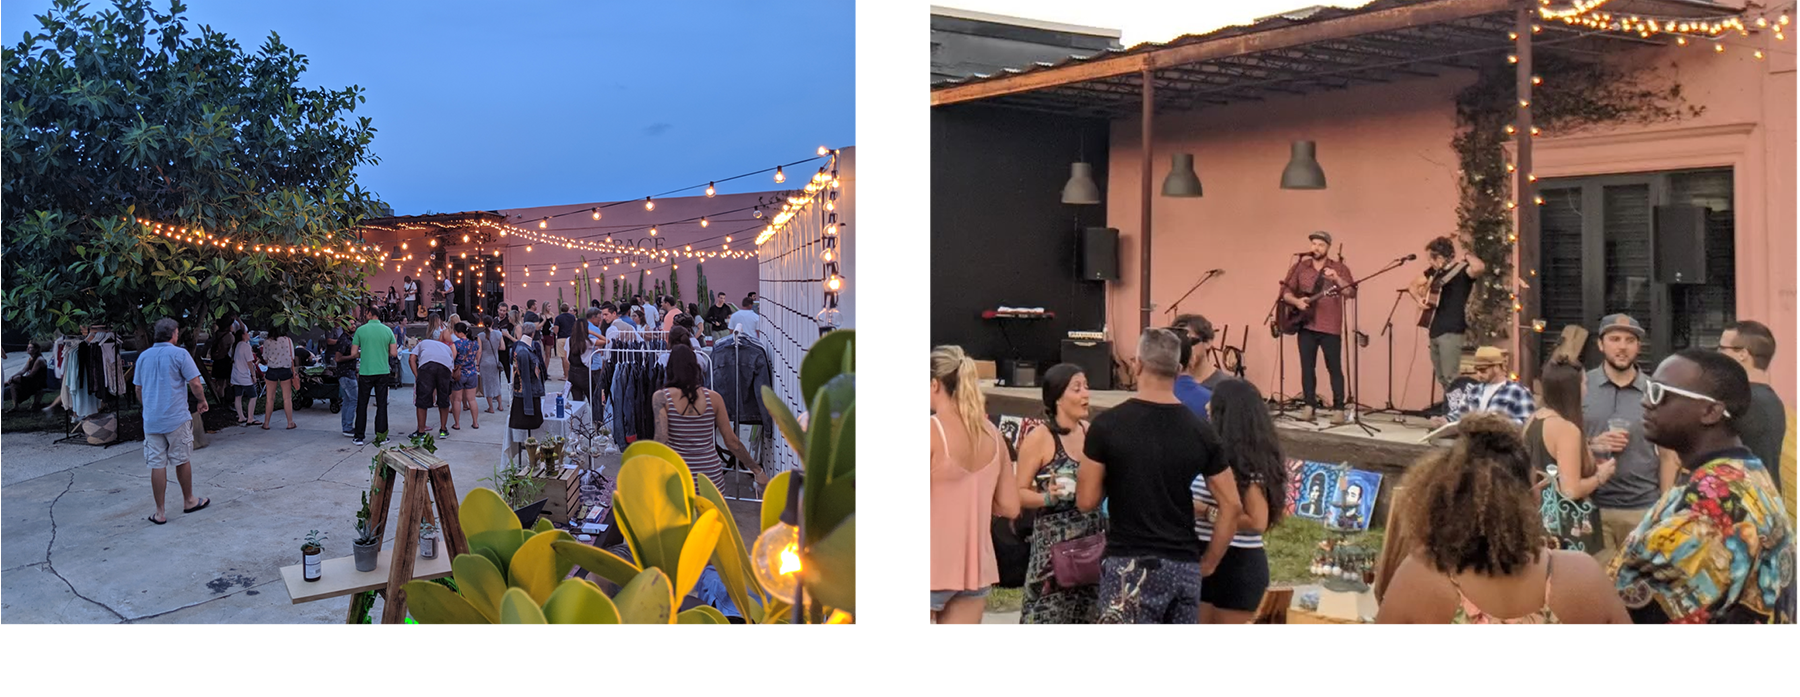 Two images of Elizabeth Ave Station's outdoor courtyard area during their music festivals and pop-up events.